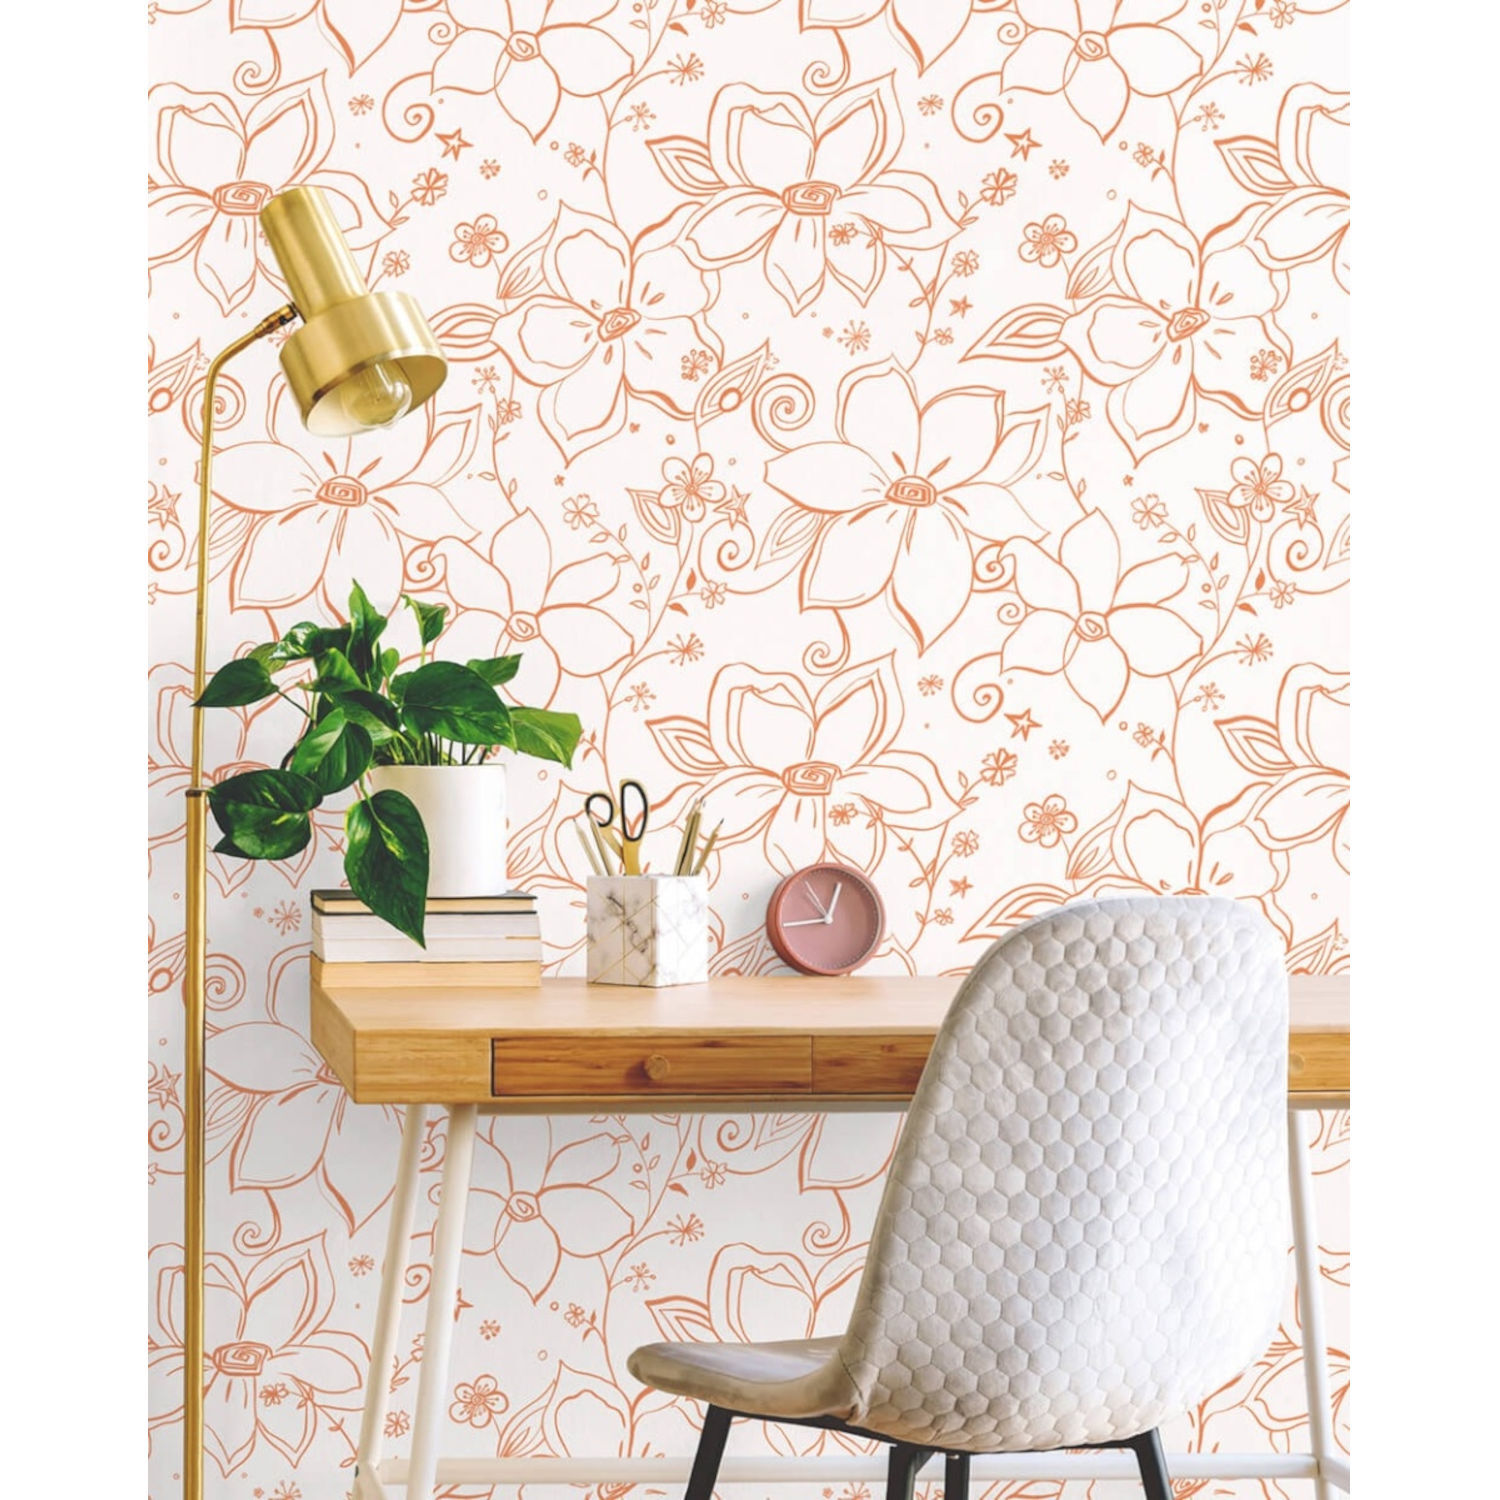 NextWall Pimpernel Floral Peel and Stick Wallpaper India  Ubuy